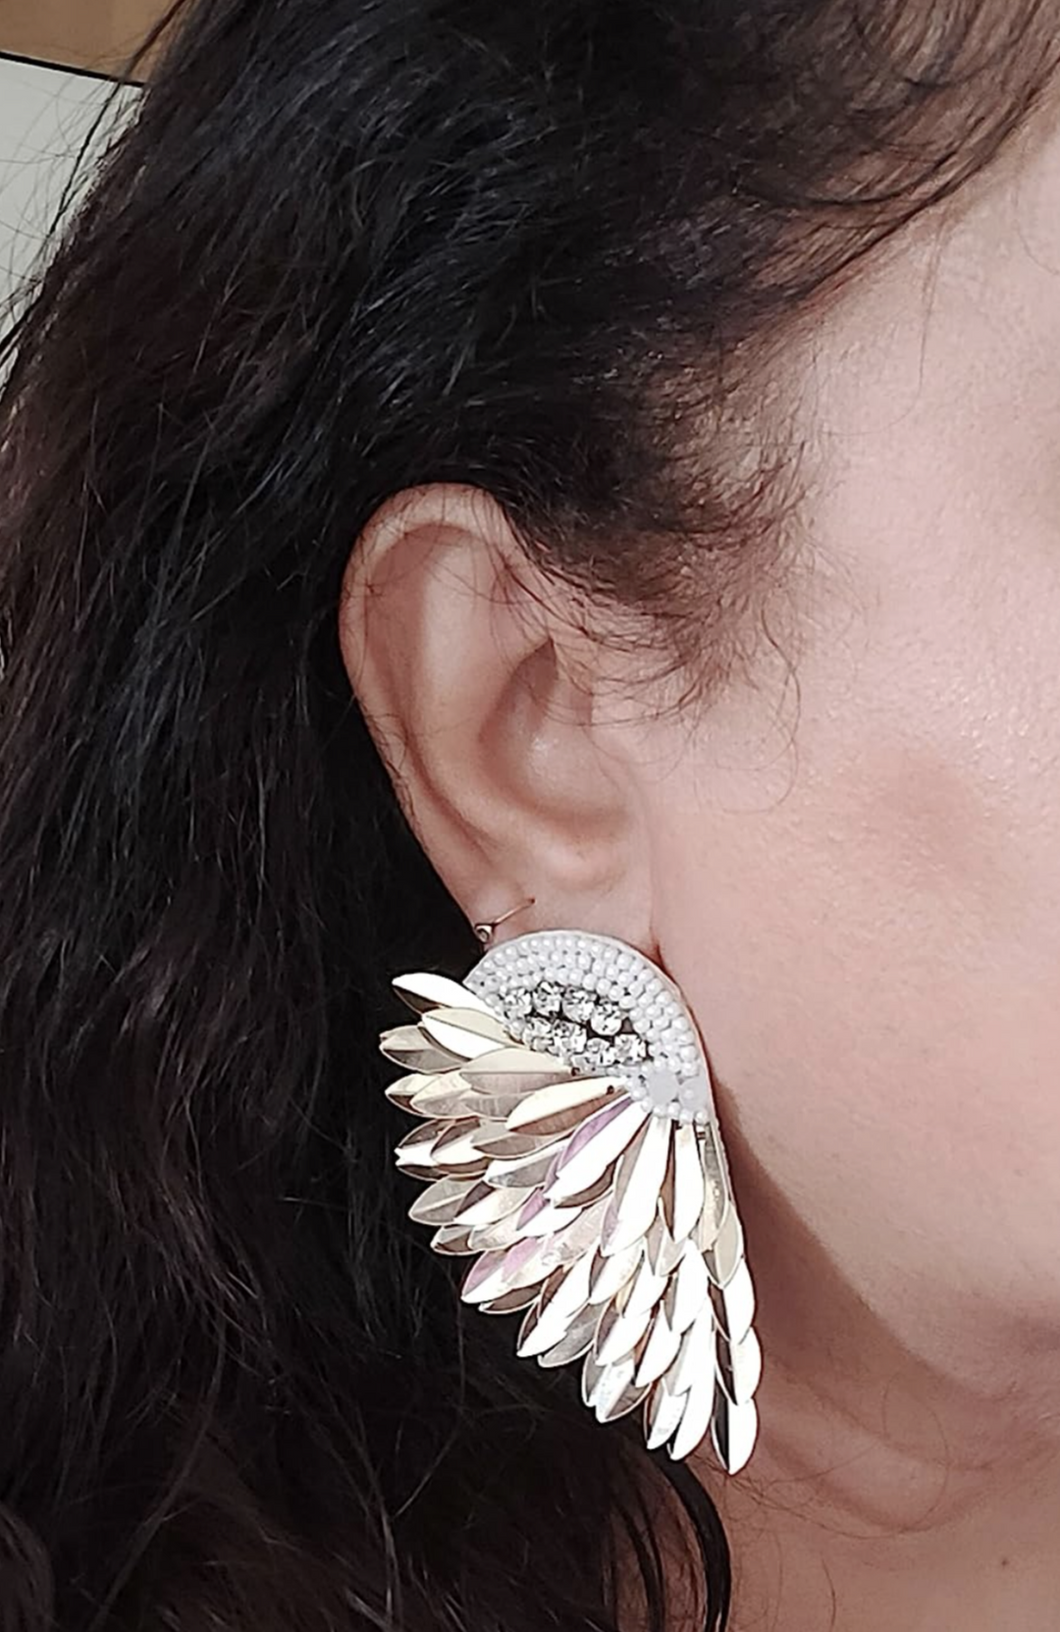 Uniquely designed fabric earrings in shape of angel wings. Very light weight earrings with a modern design